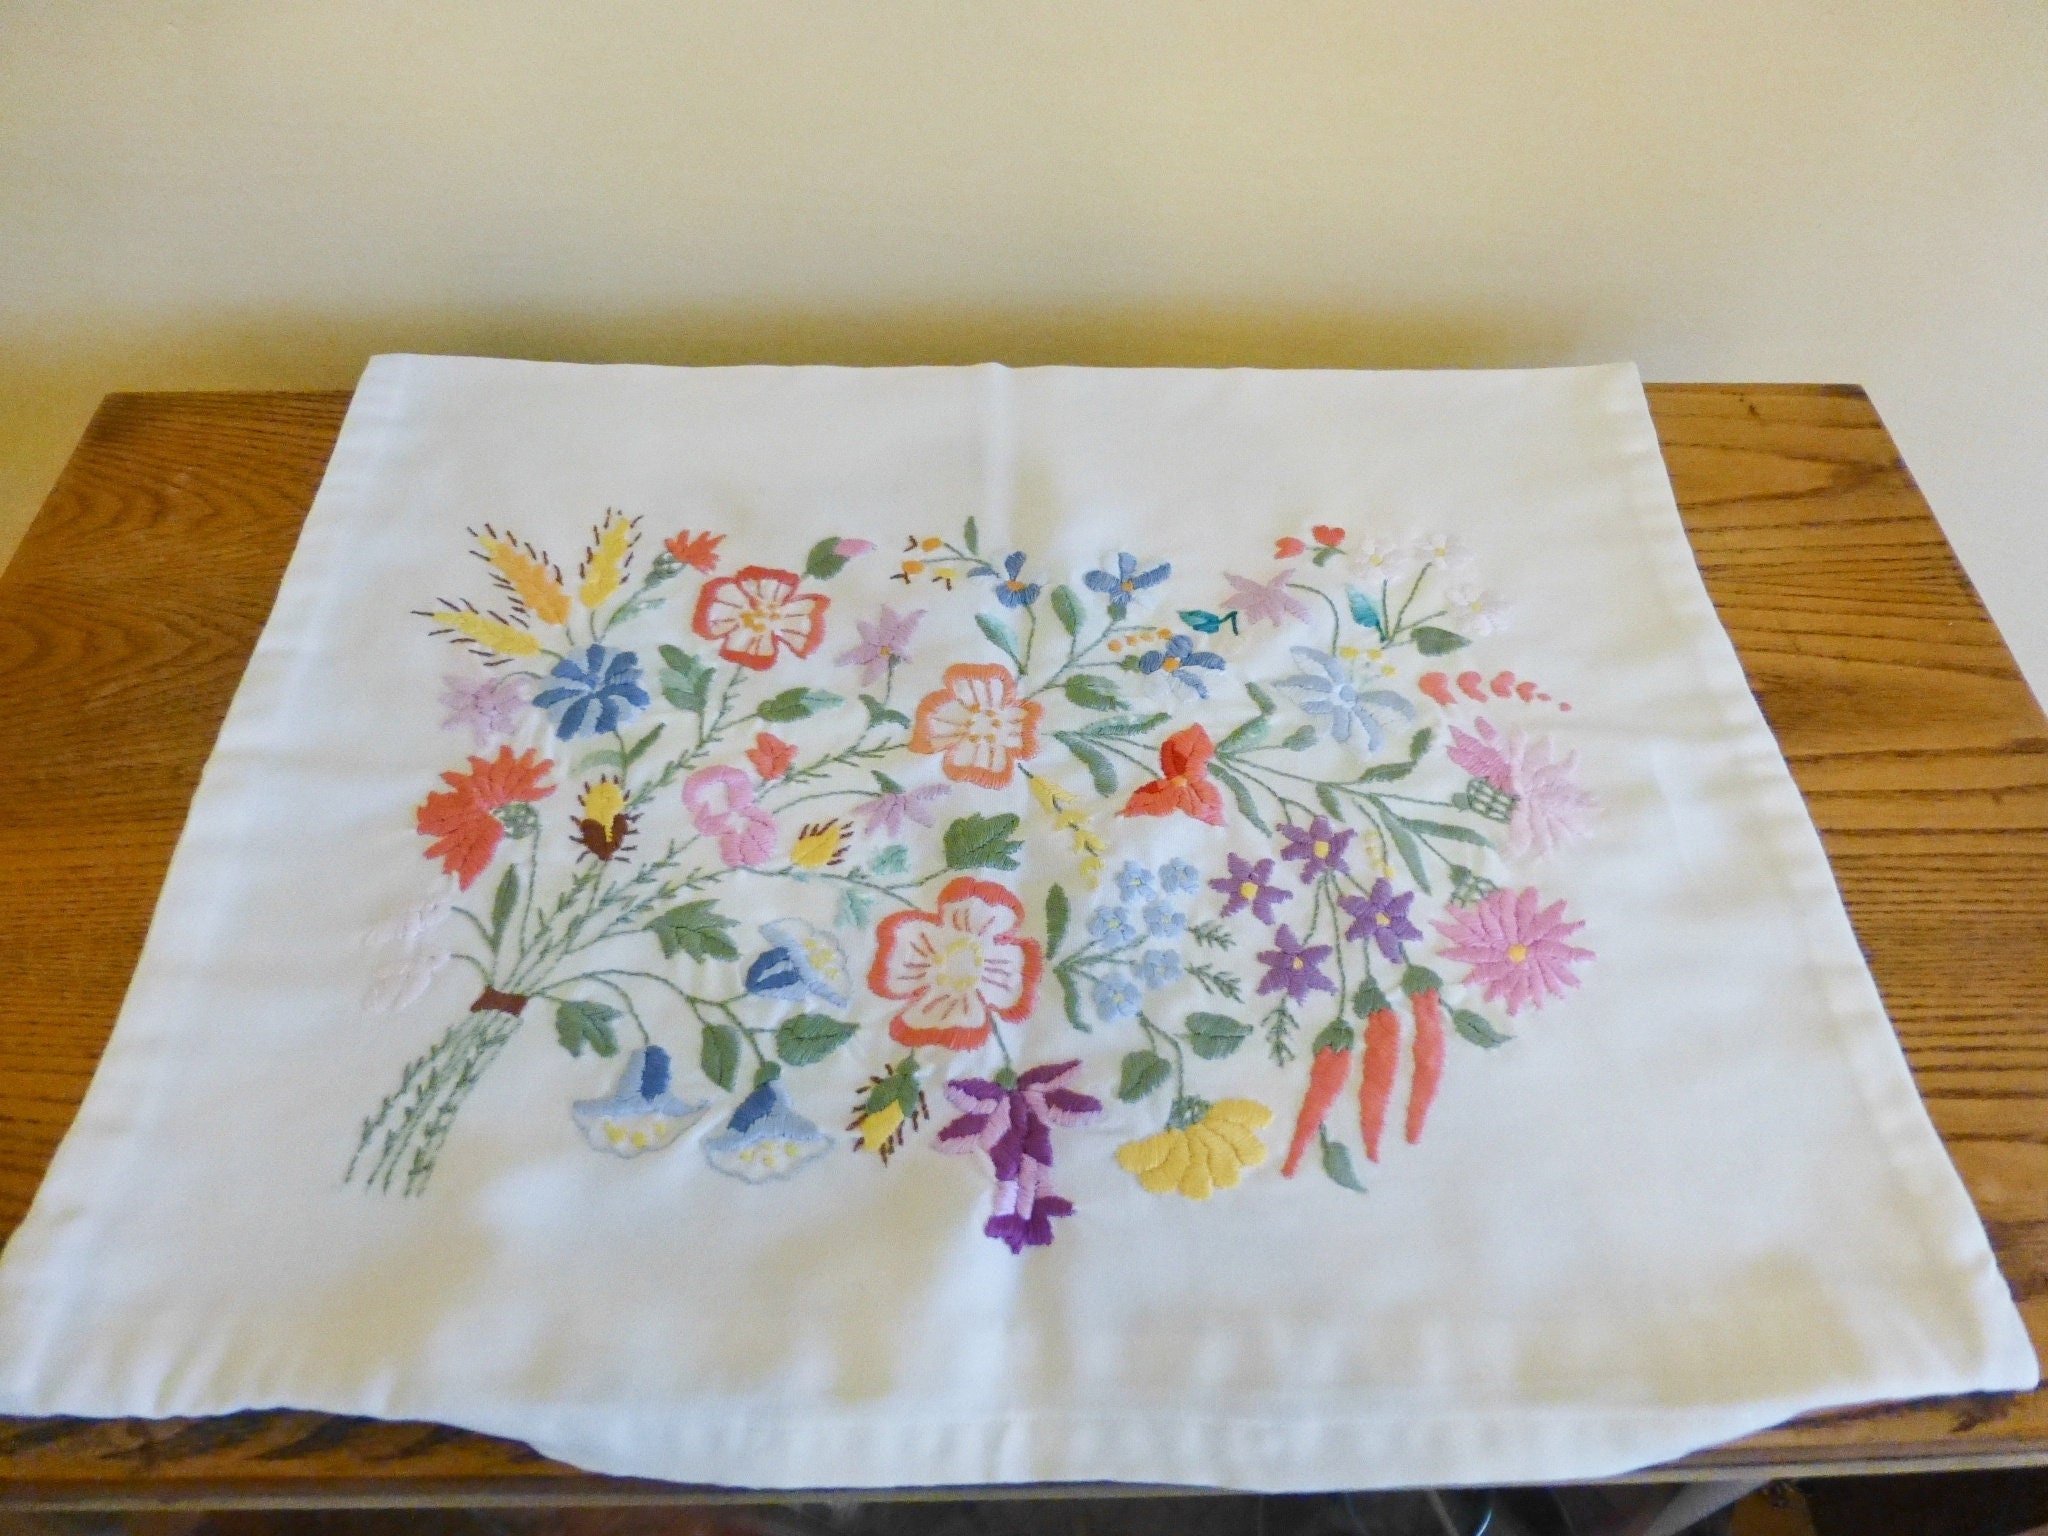 VintageHungarian handmade embroidered pillowcase with Kalocsa | Etsy